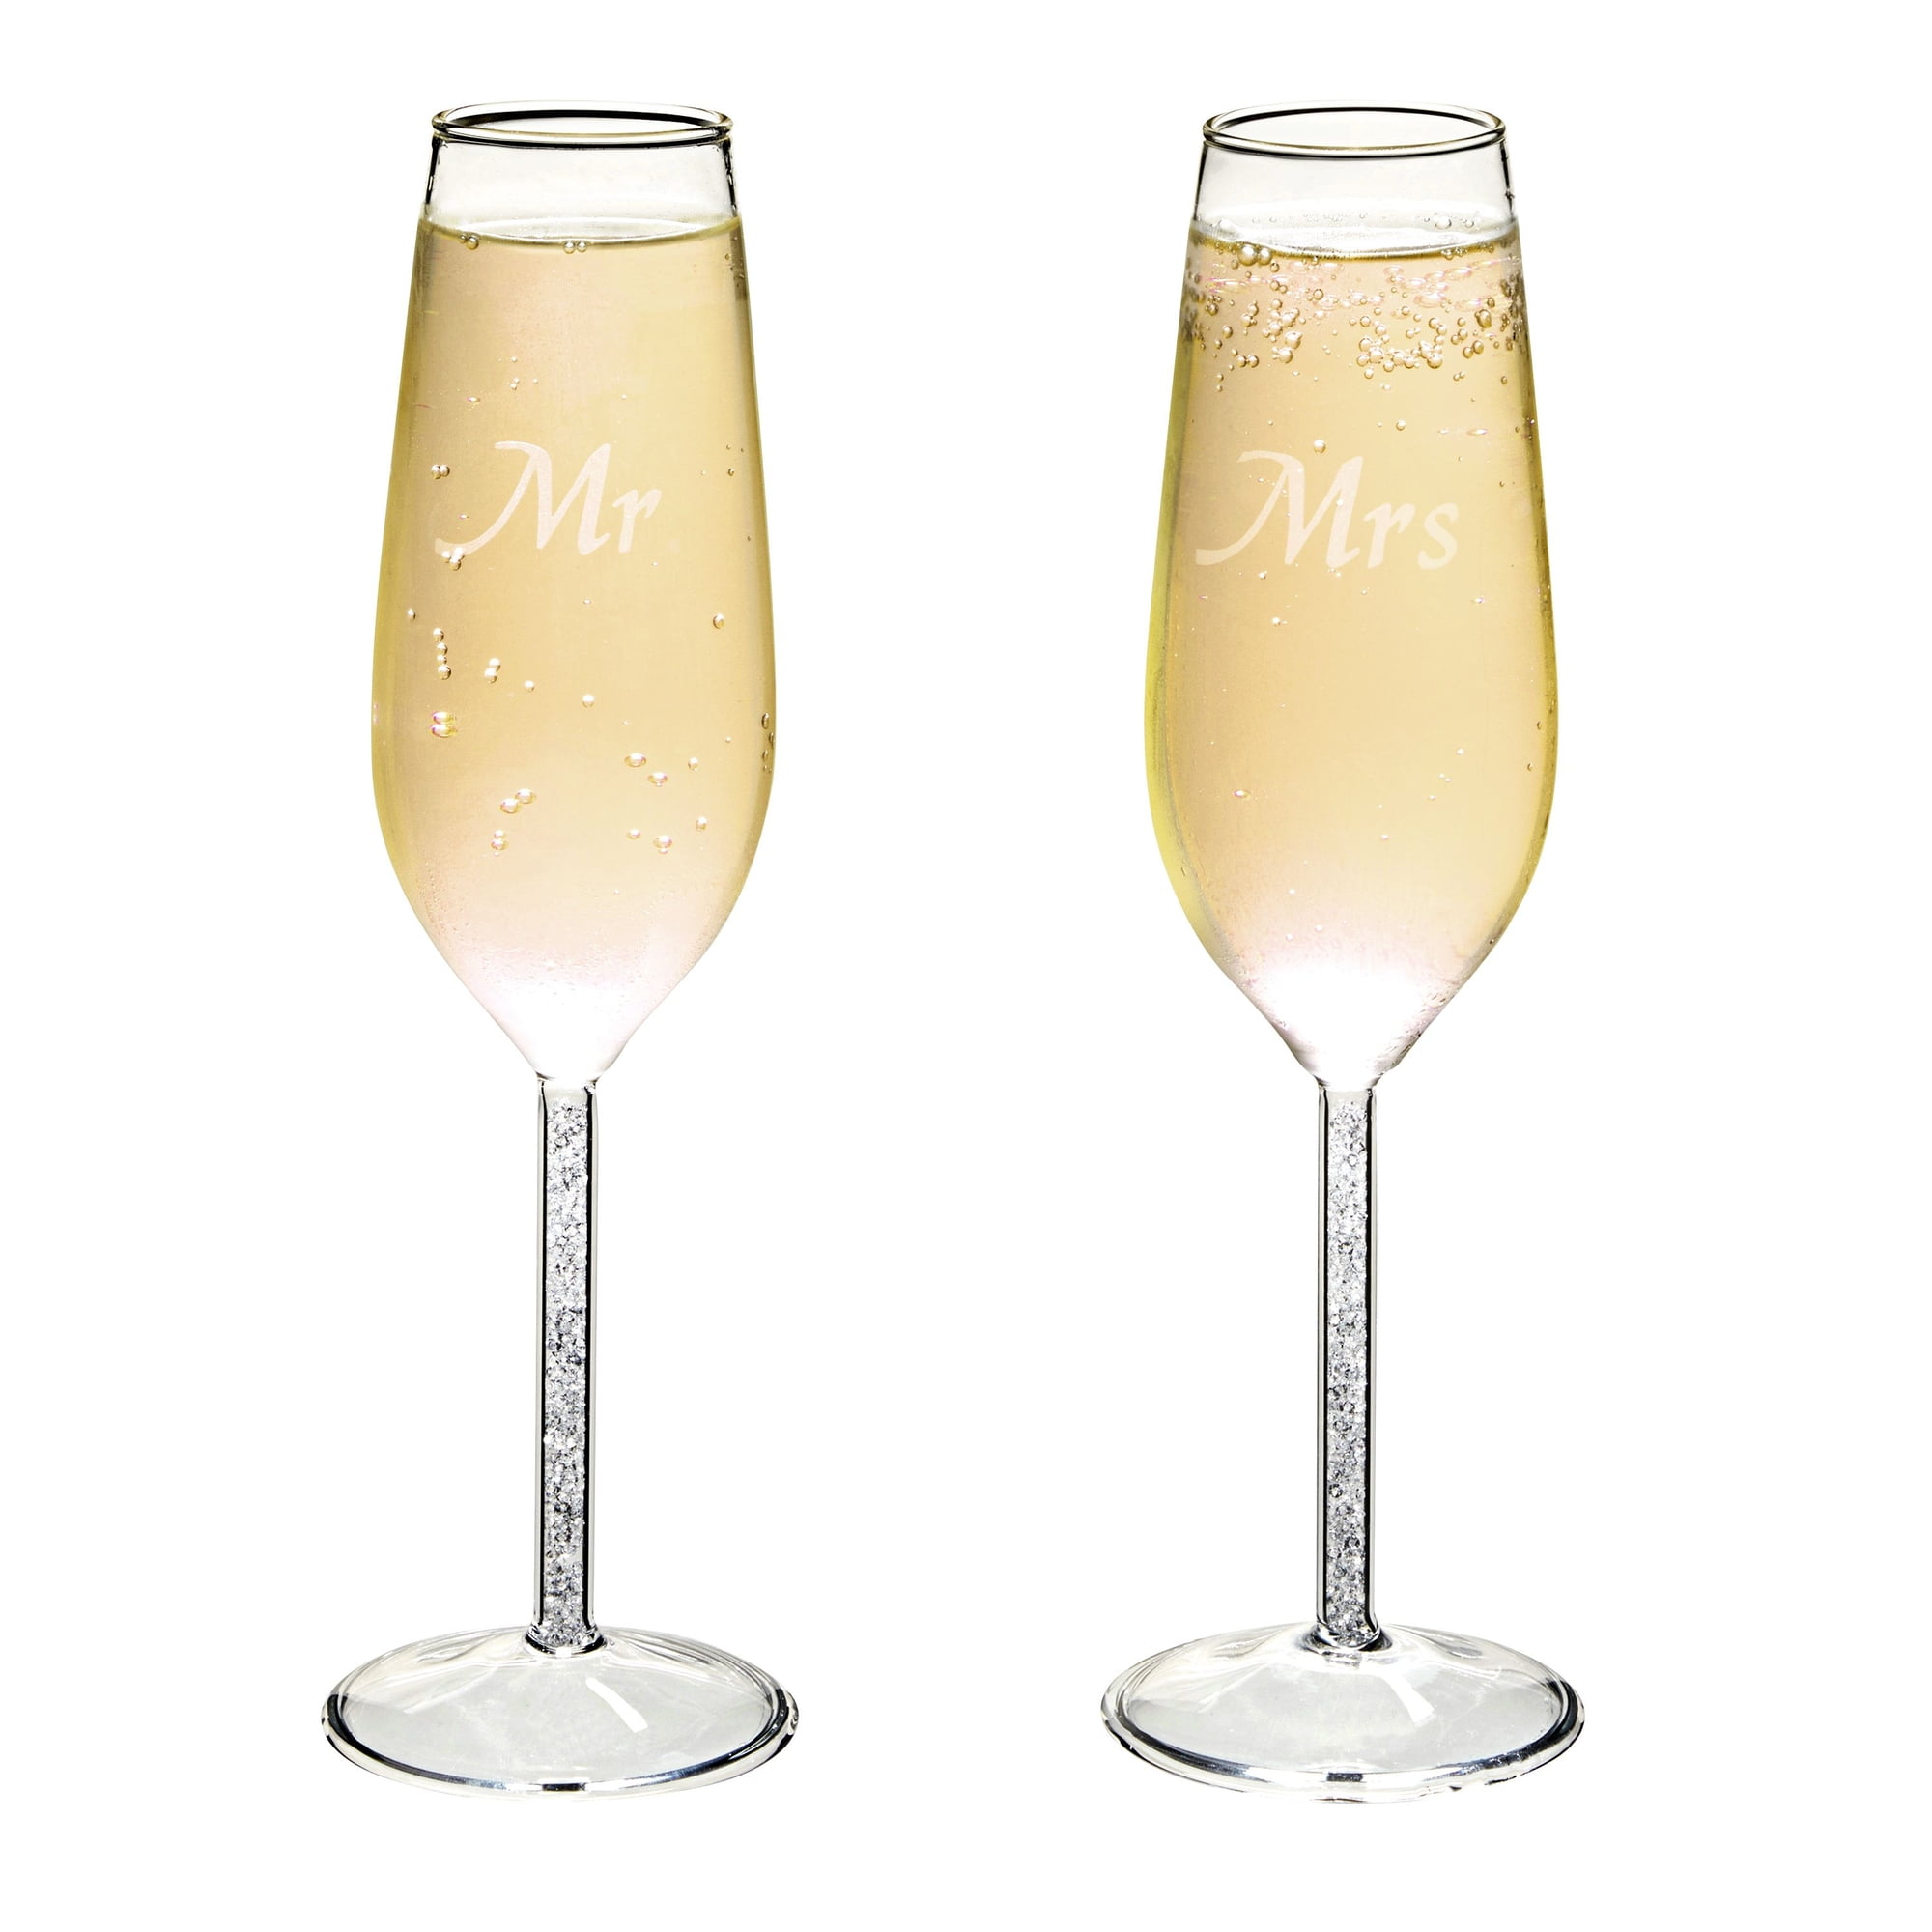 Bride Champagne Flute, 6 Oz Double Insulated Champagne Flute Tumbler,for  Couples Newlyweds Bride Groom Wife His and Hers Anniversary